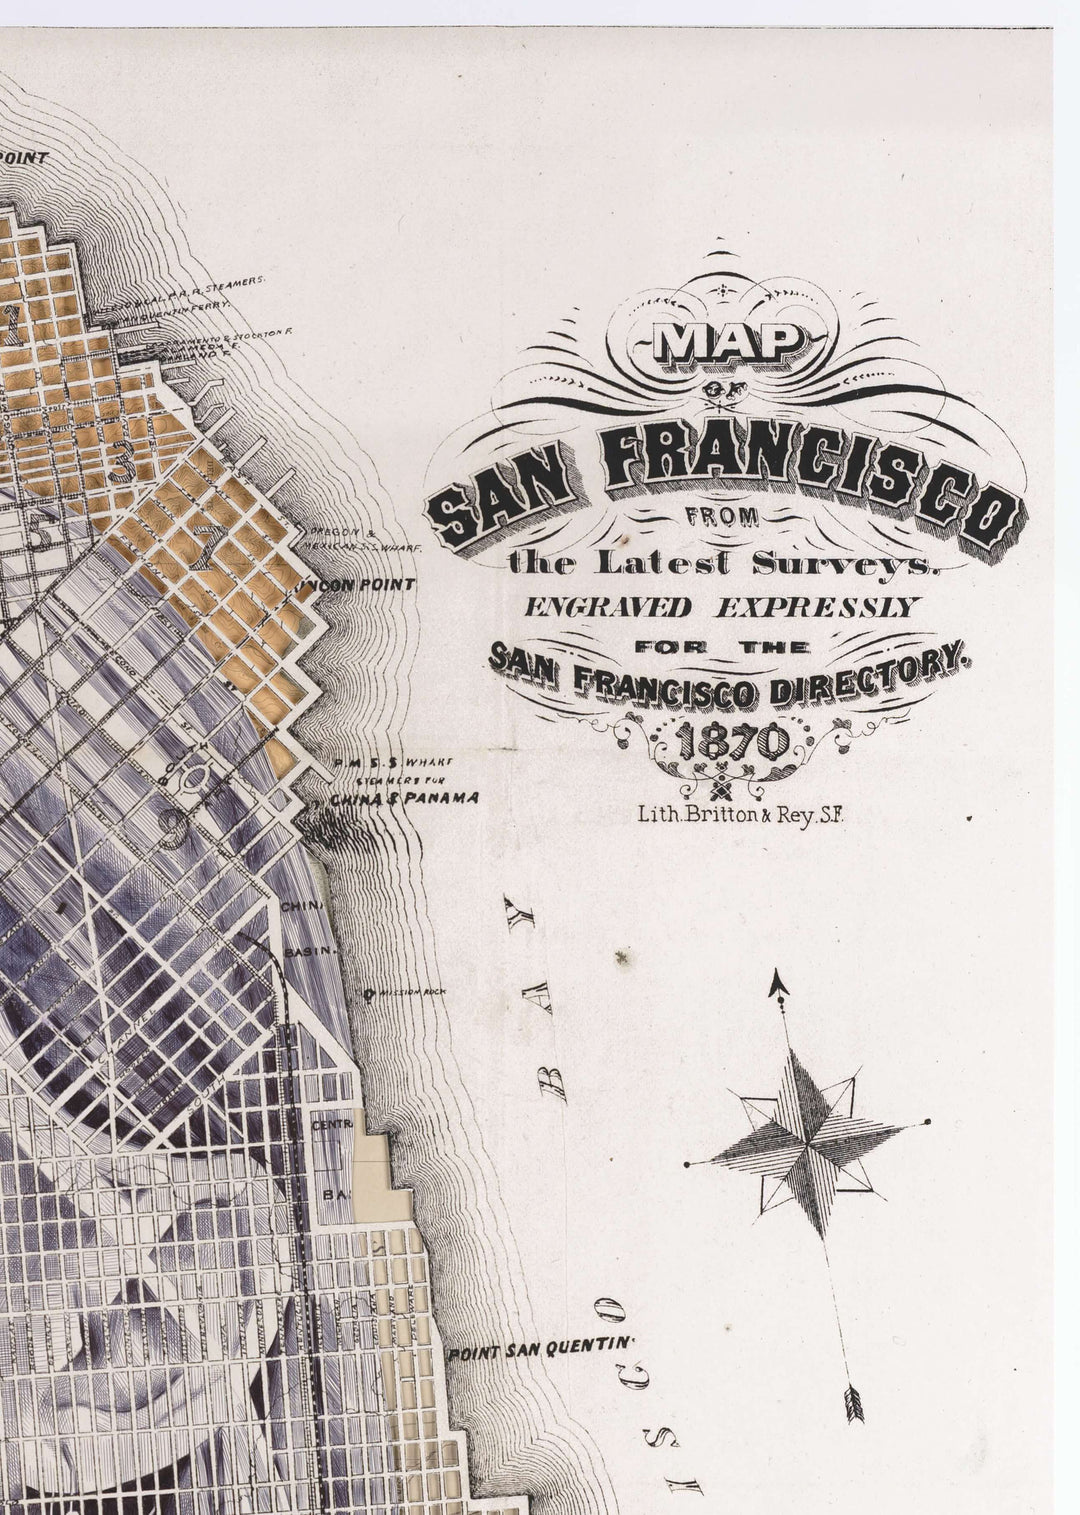 A map of Ed Fairburn's "San Francisco" with a star on it.